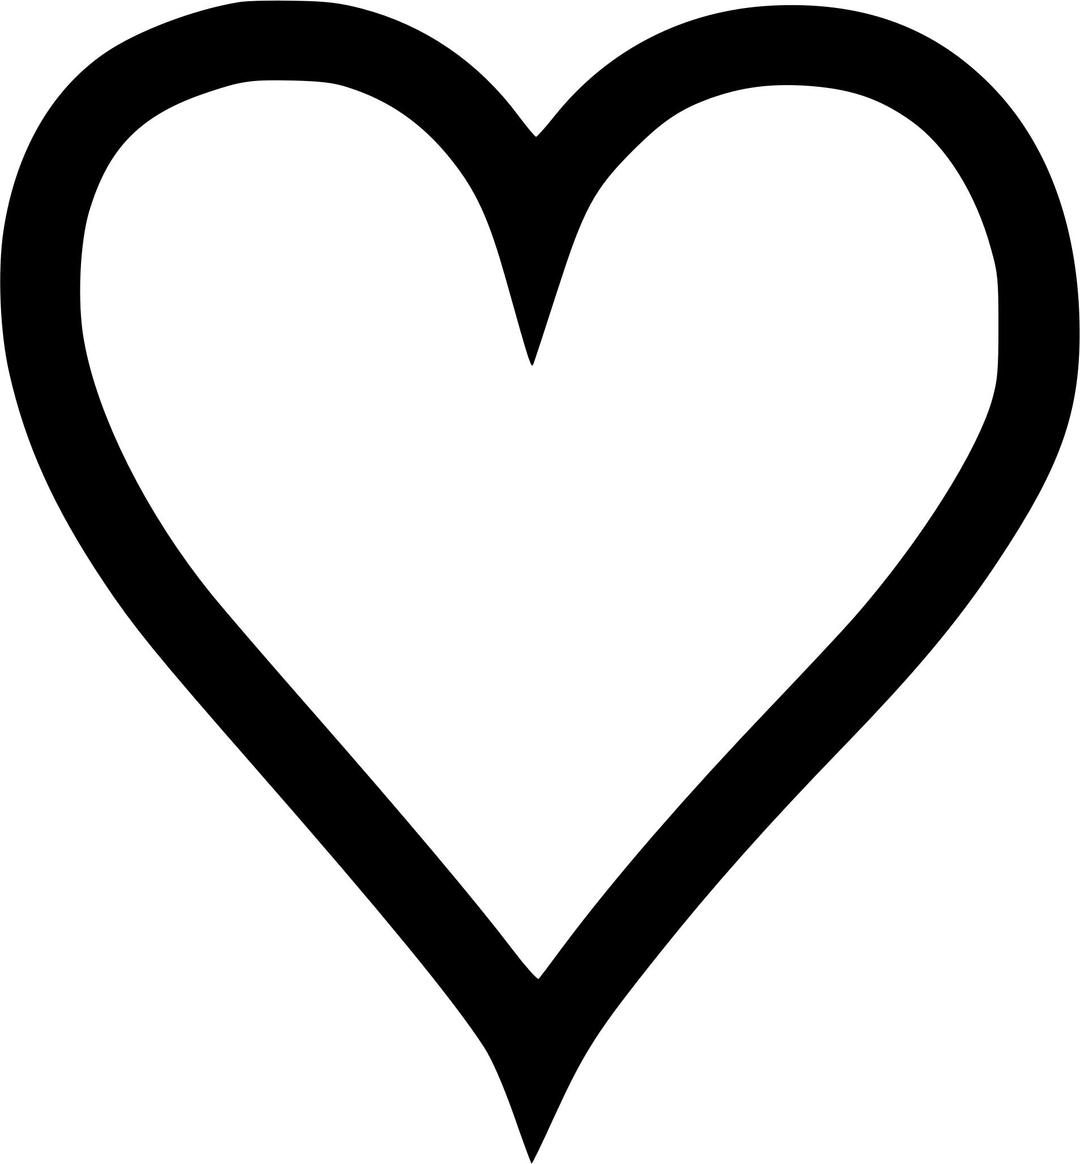 Akoma - The Heart png transparent